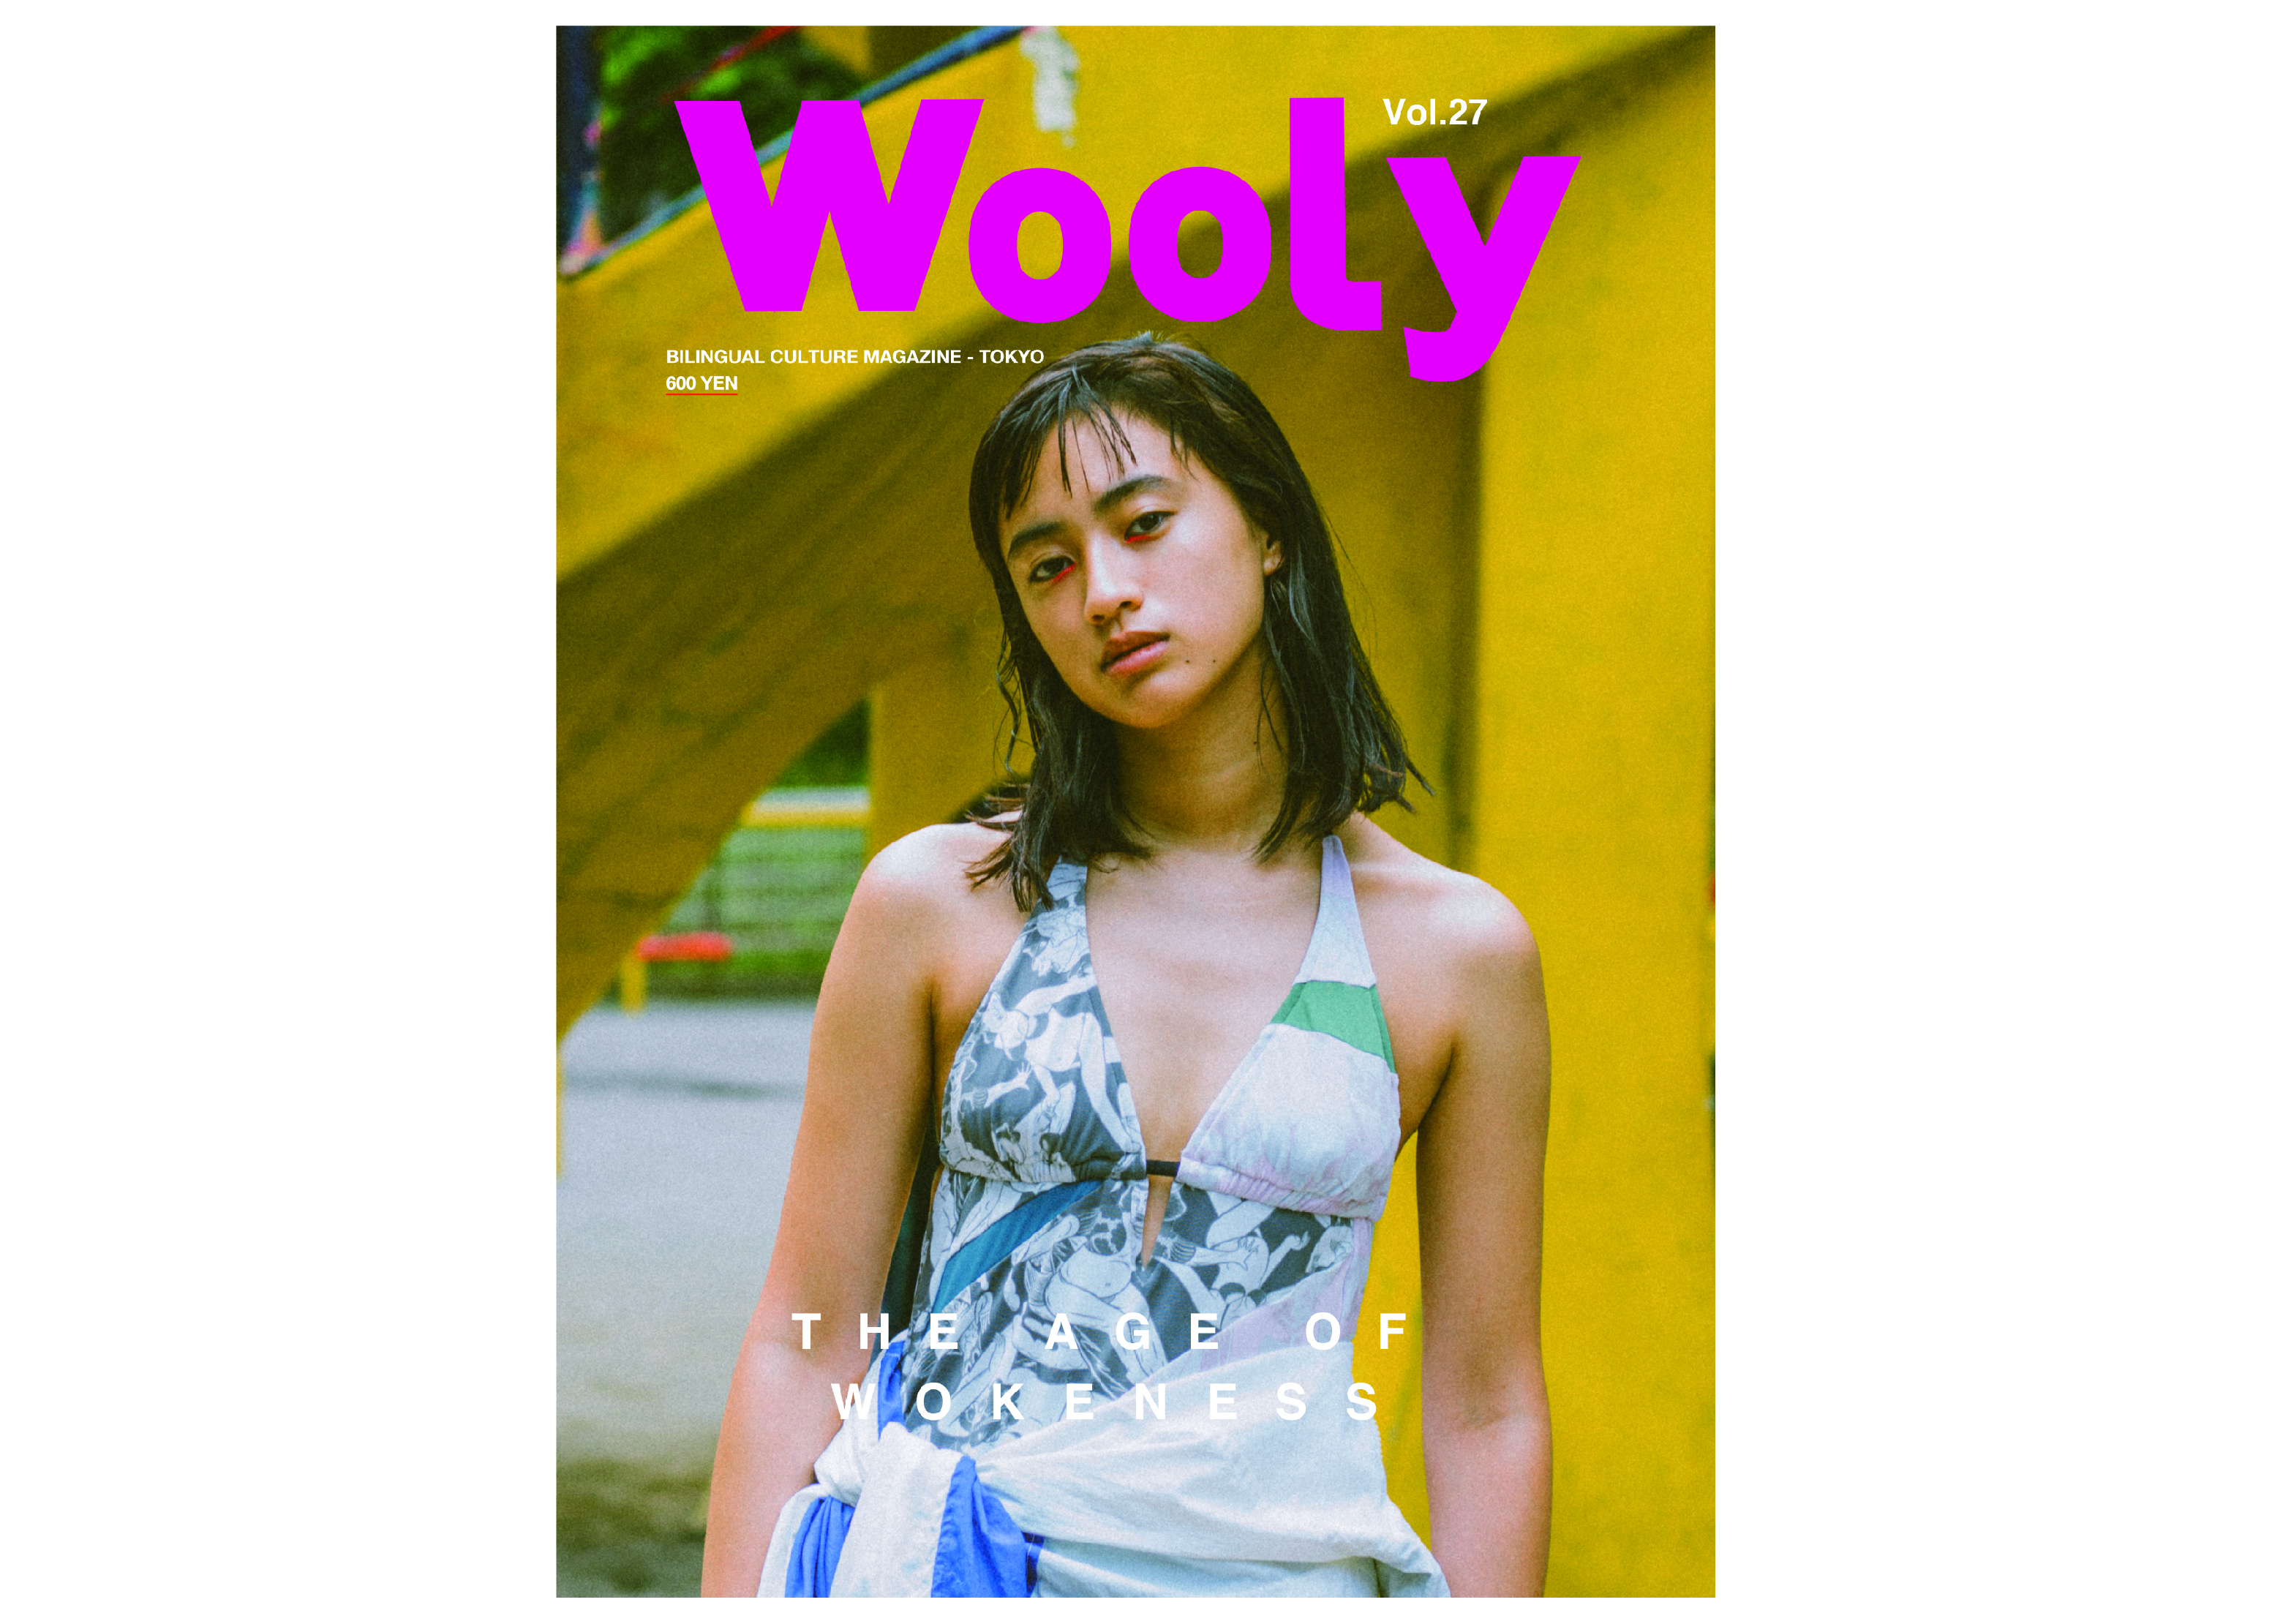 Wooly Magazine vol.27 “The Age of Wokeness”